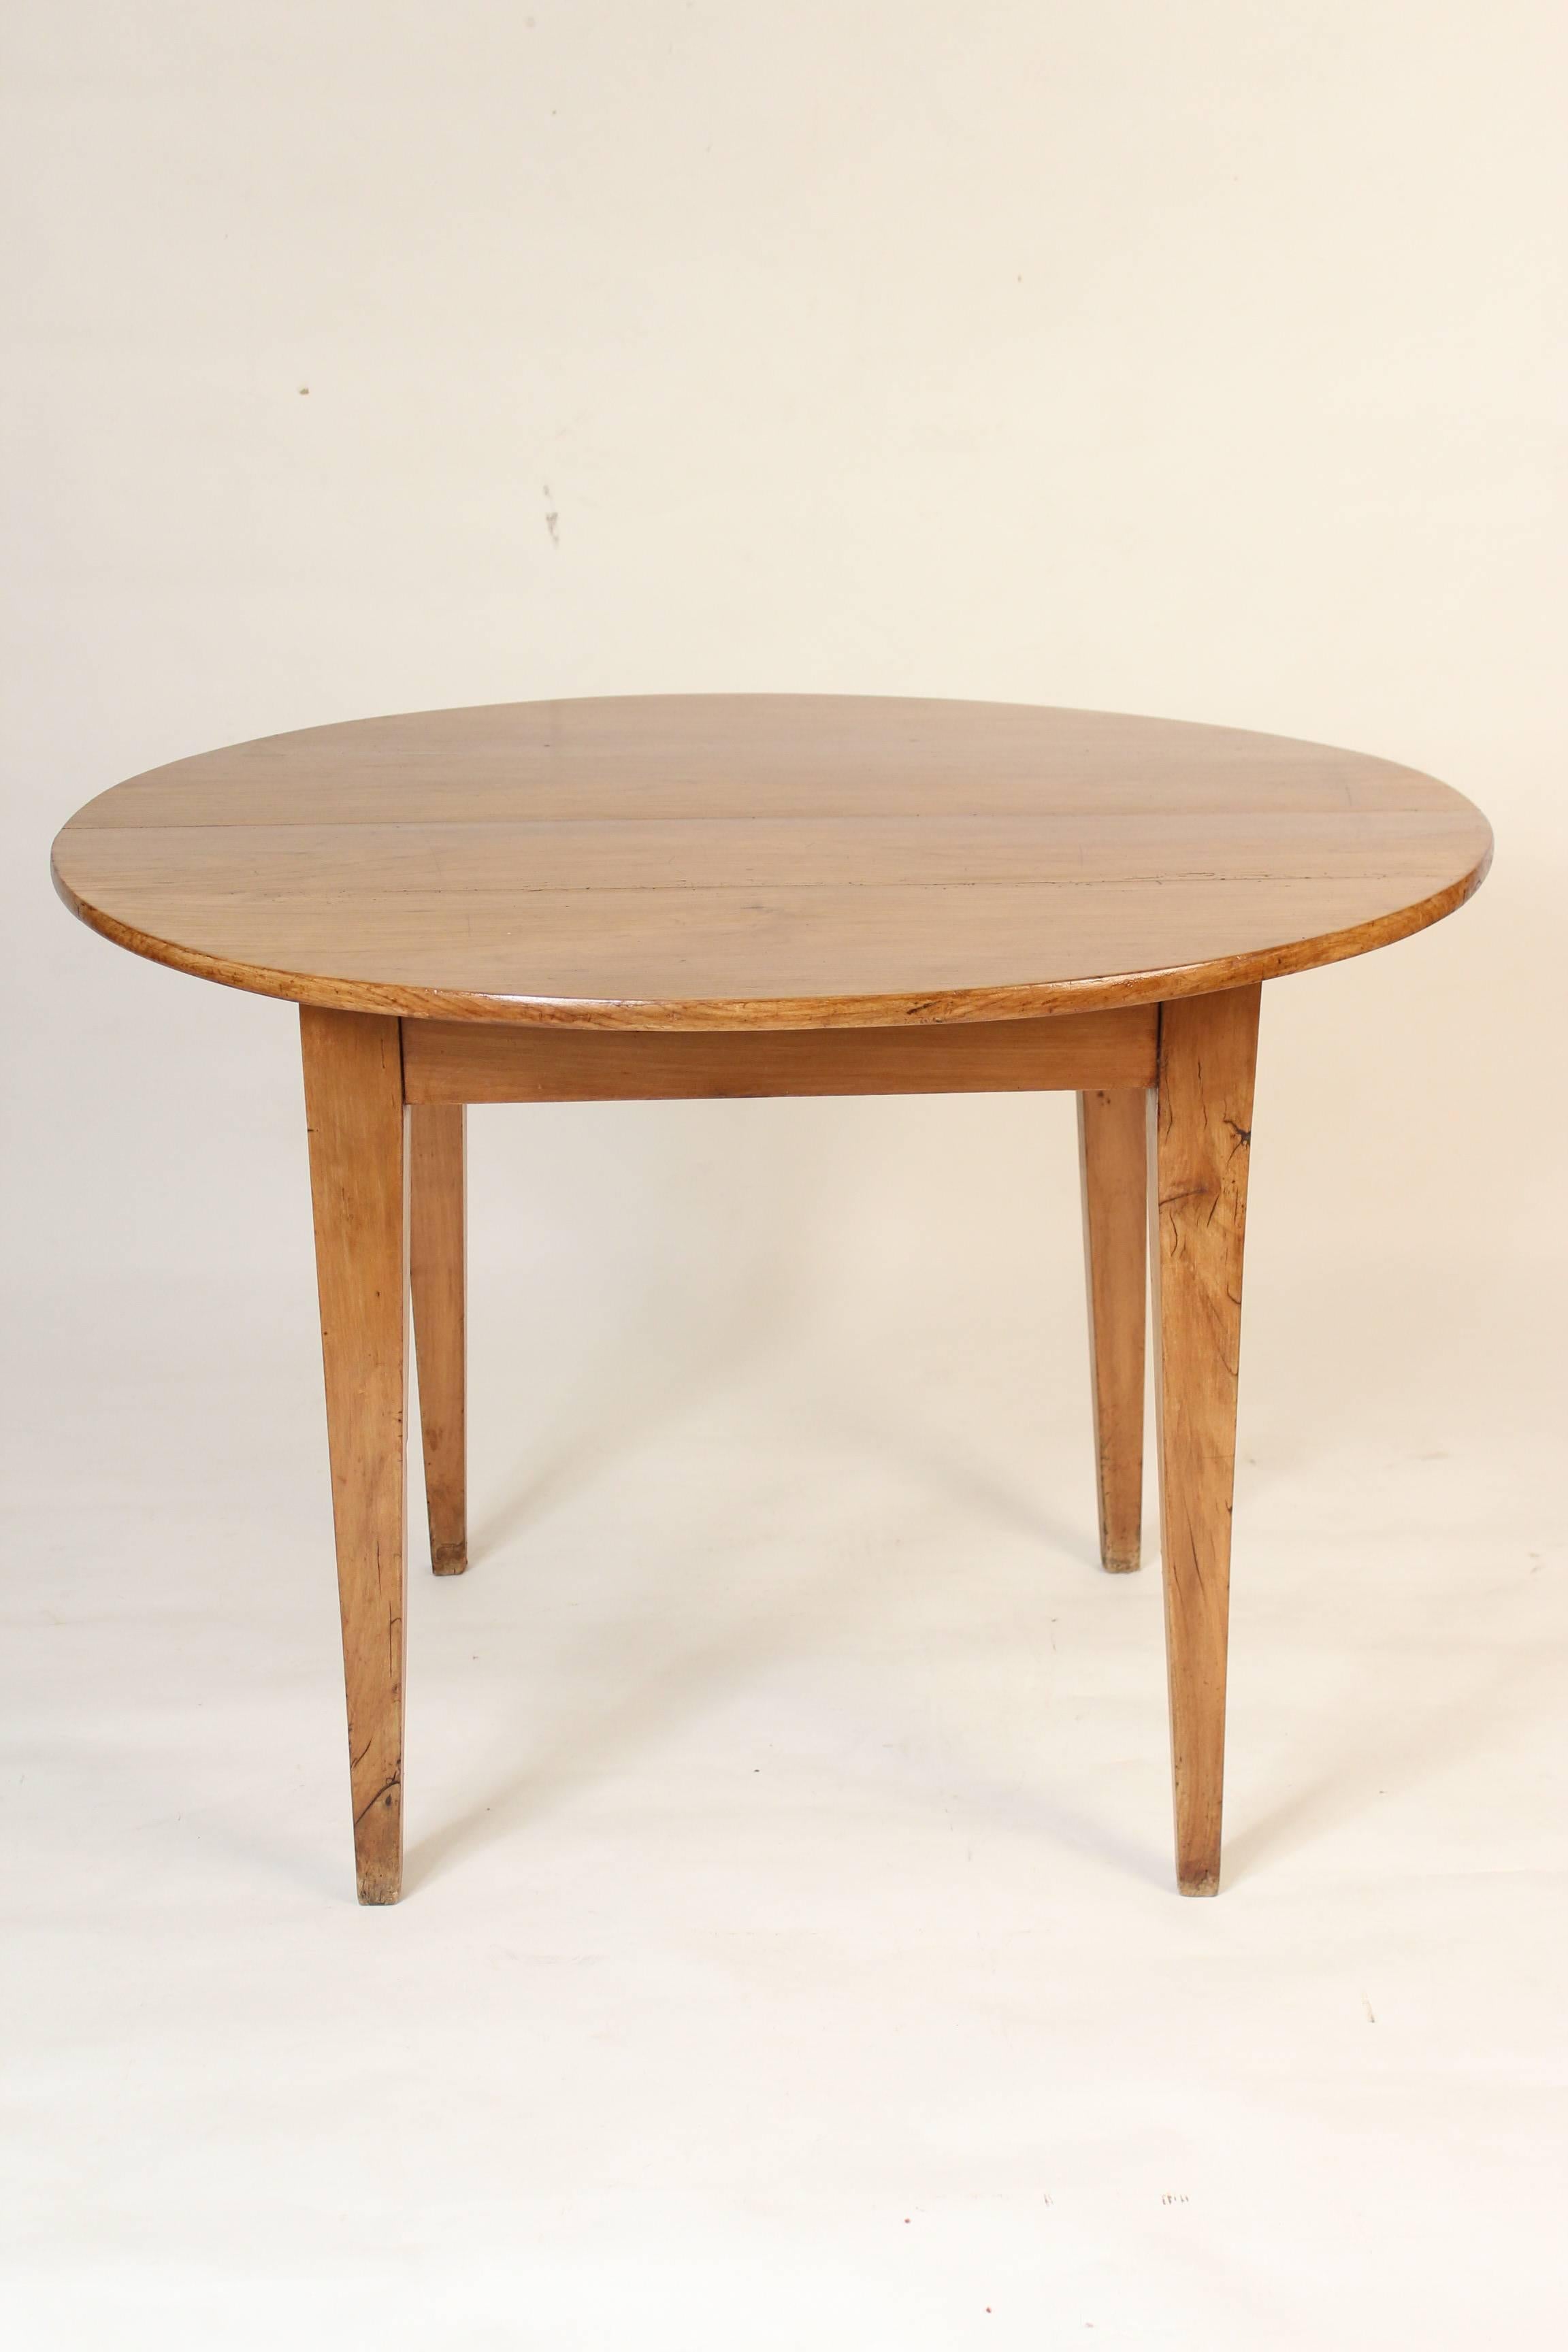 Directoire style fruitwood round breakfast or games table, made from antique and later elements. Provenance: Hideway House Antiques.